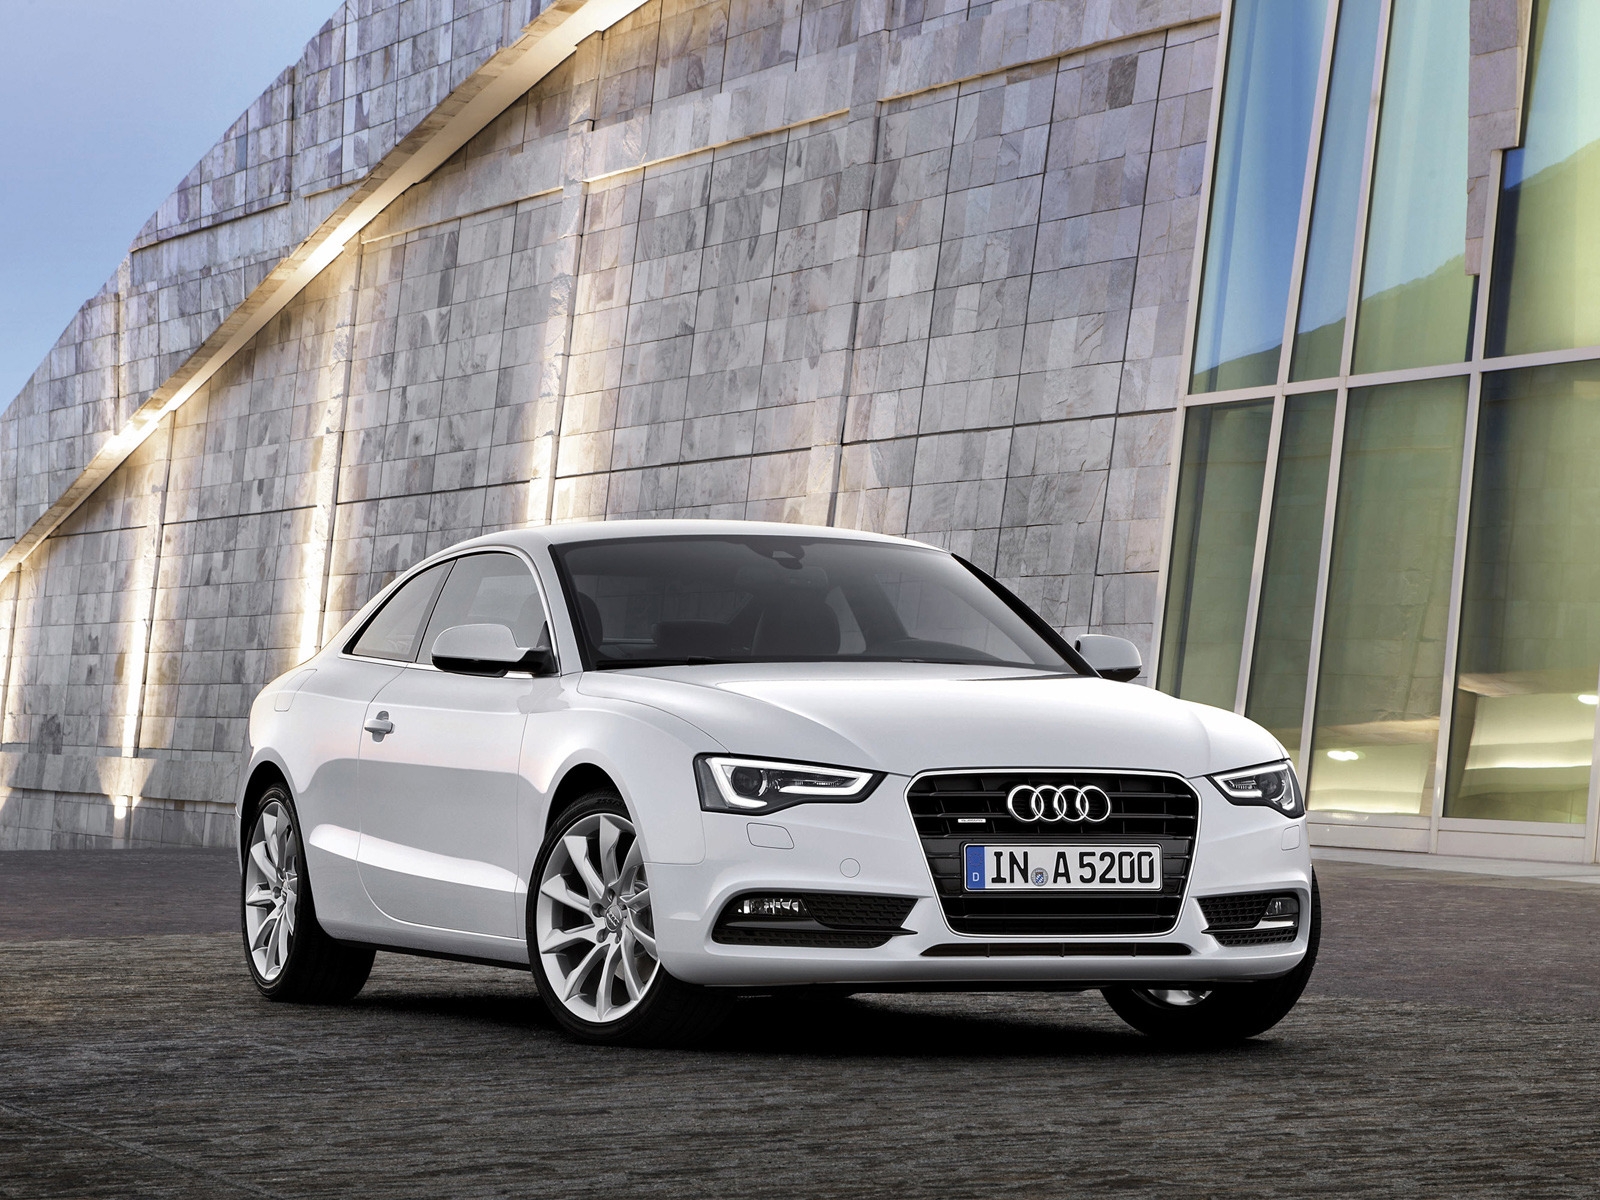 2012 Audi A5 Coupe for 1600 x 1200 resolution